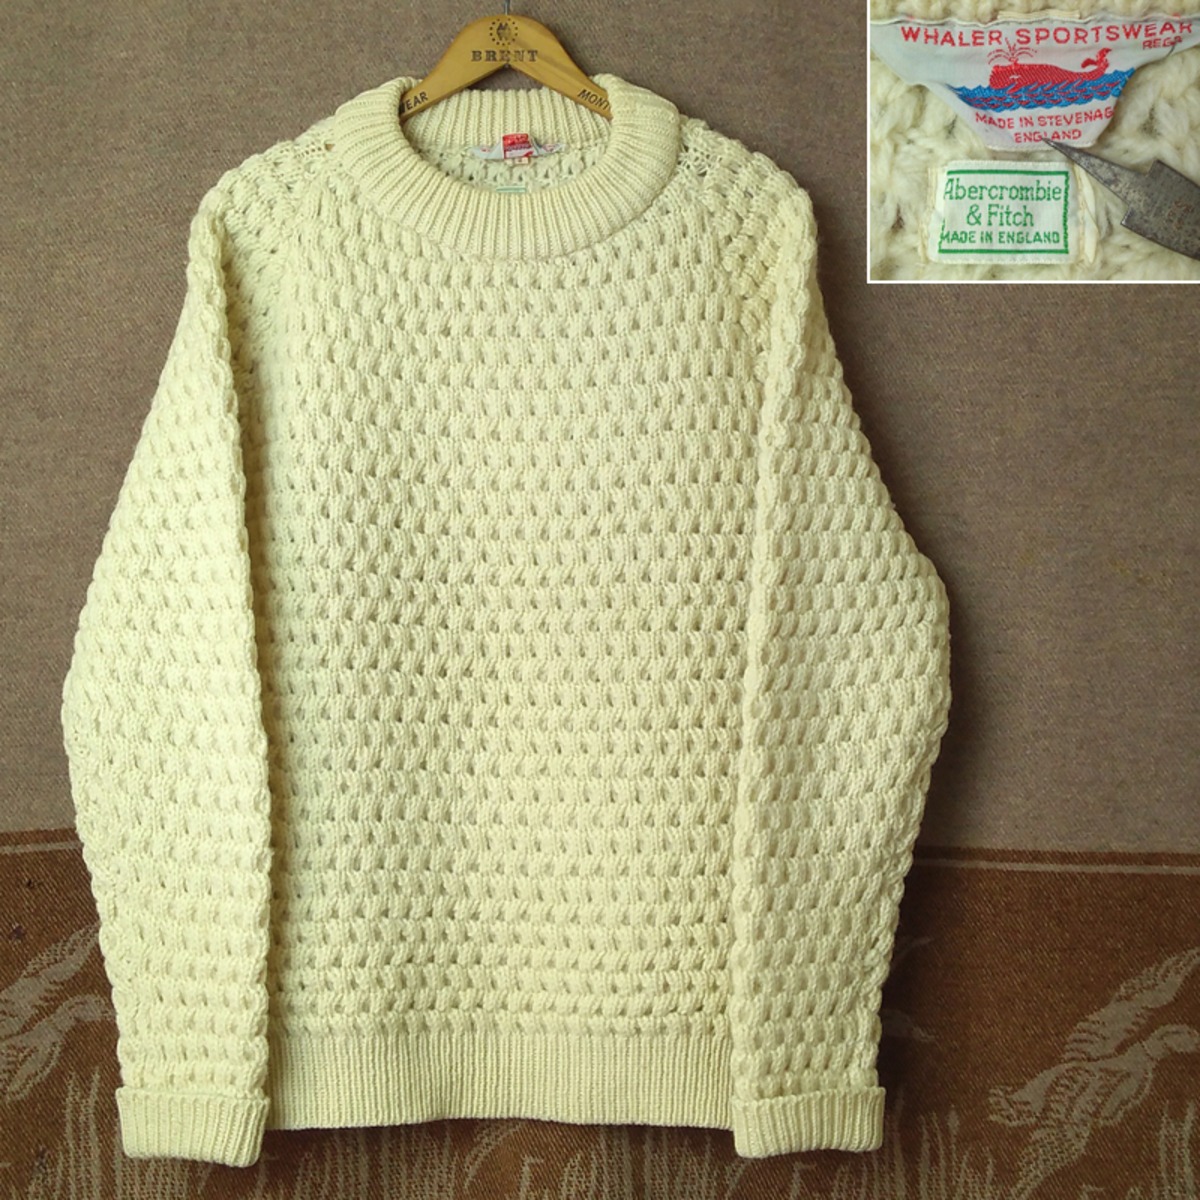 70s Abercrombie & Fitch Sweater Made by WHALER SPORTSWEAR L | Wonder Wear  ヴィンテージ古着ネットショップ